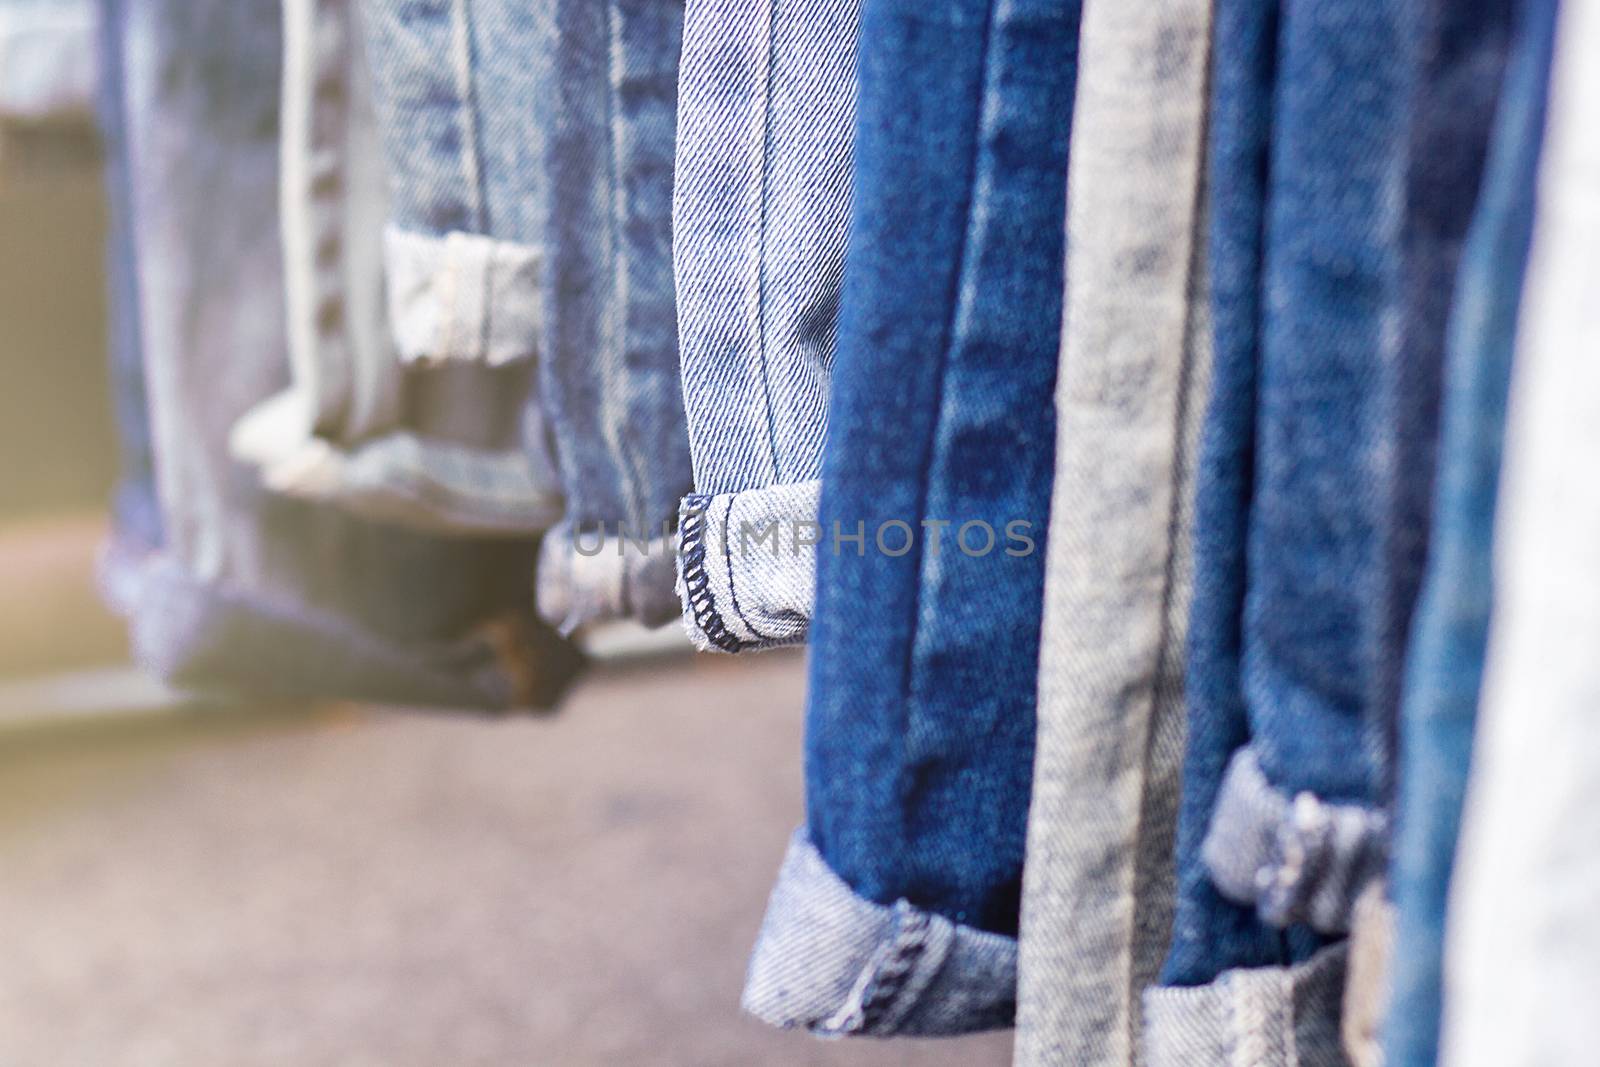 Lot of different blue jeans, selective focus by rakoptonLPN